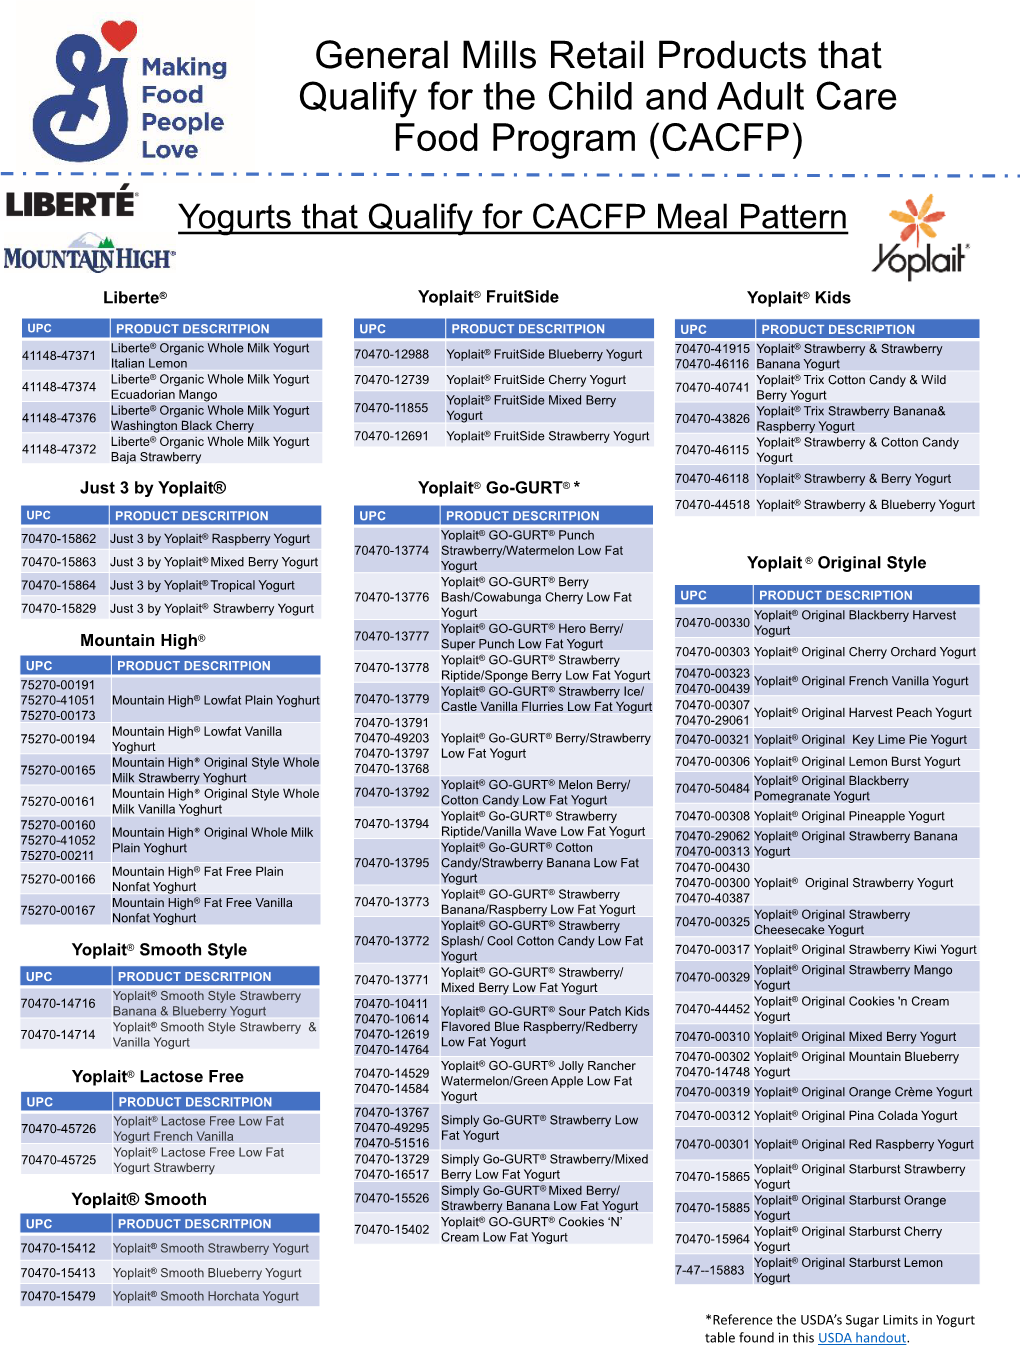 Yogurts That Qualify for CACFP Meal Pattern